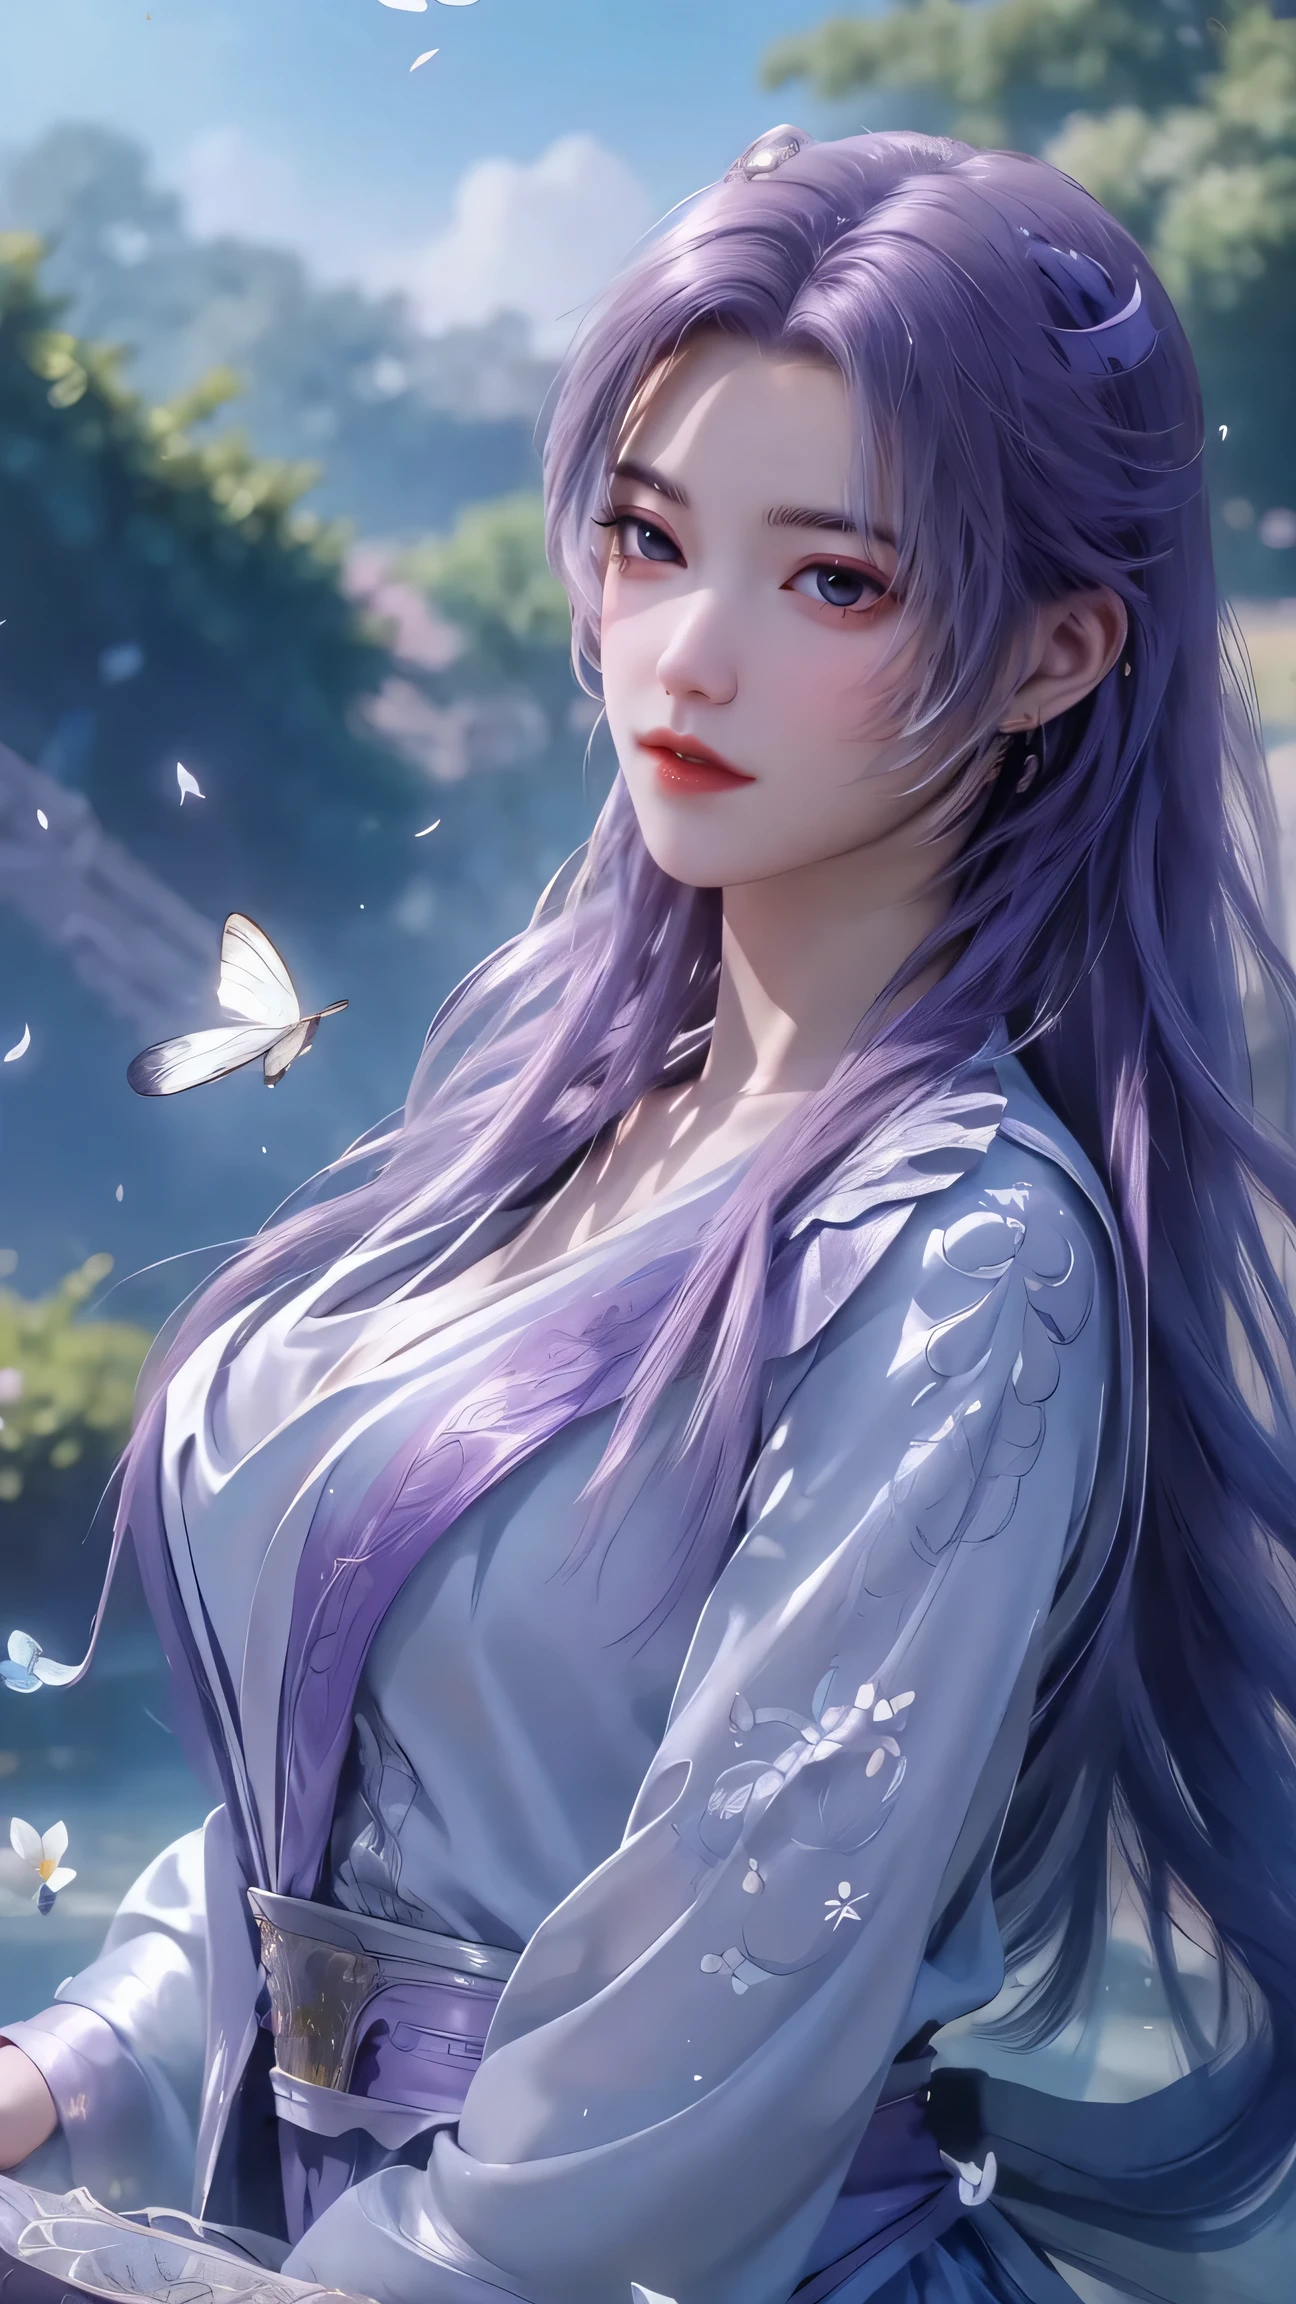 (best quality,ultra-detailed,photorealistic:1.37),vivid colors,studio lighting,beautiful detailed eyes,beautiful detailed lips,extremely detailed eyes and face,long eyelashes,portraits, purple hair,confident expression,feminine,standing in a garden,soft sunlight, scenery,flower blossoms,peaceful atmosphere,artistic touch,textured brushstrokes,subtle color variations,brilliant white highlights,delicate movements,graceful pose,slight breeze,rustling leaves,sophisticated style,professional artwork,female beauty.